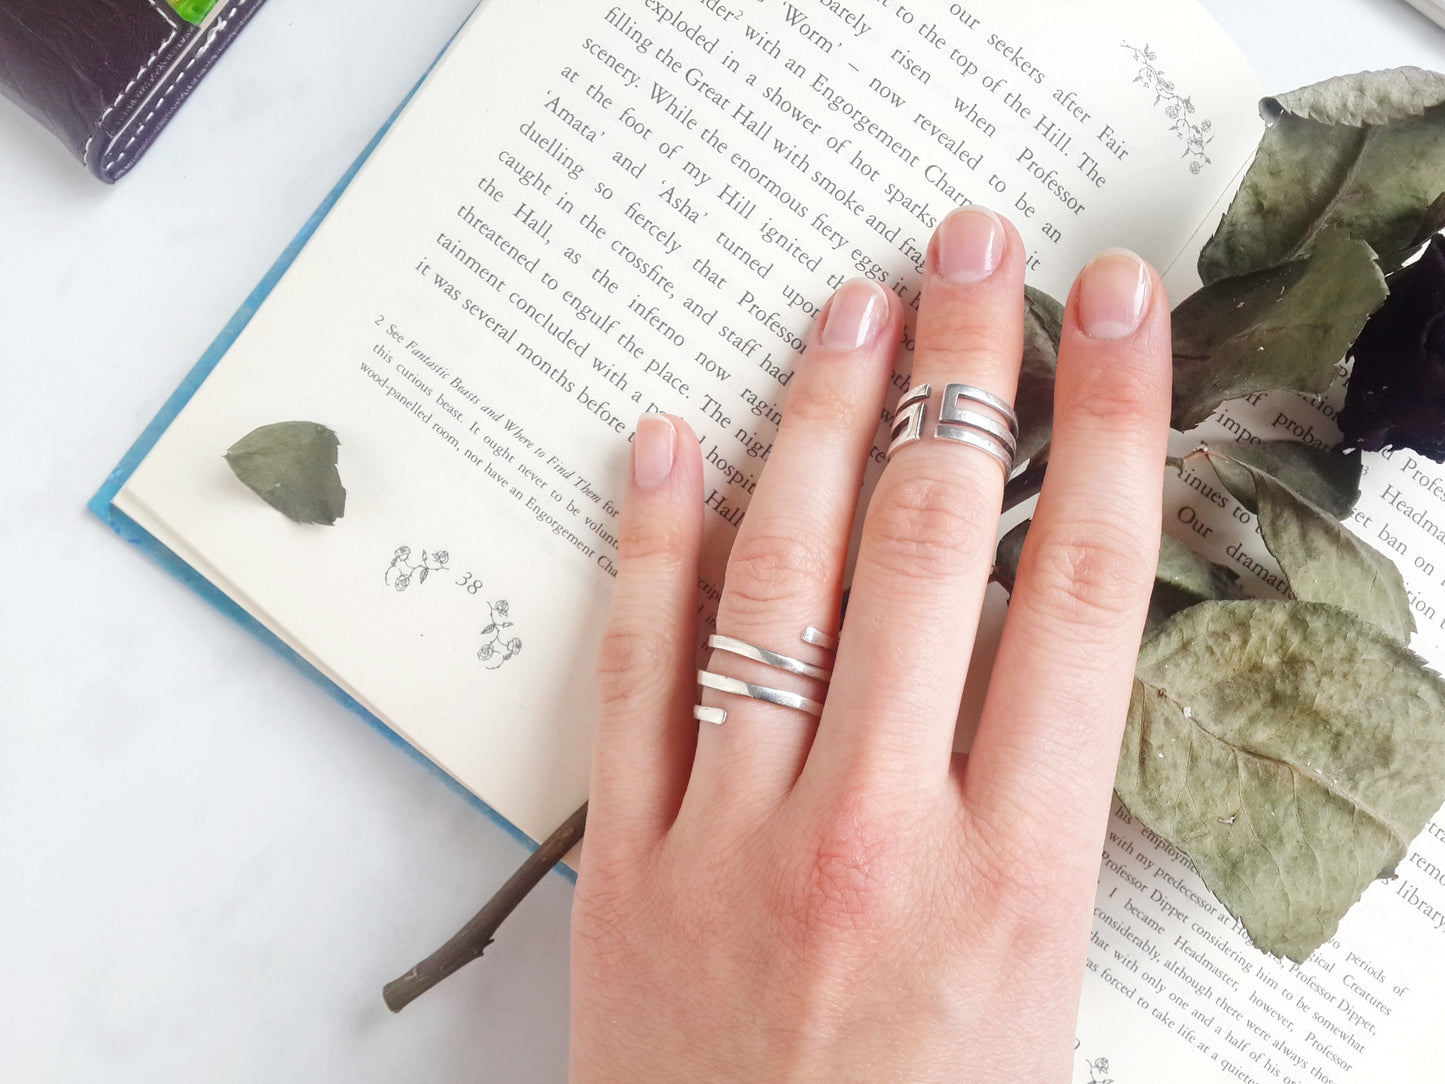 Ring Labyrinth, Sterling Silver